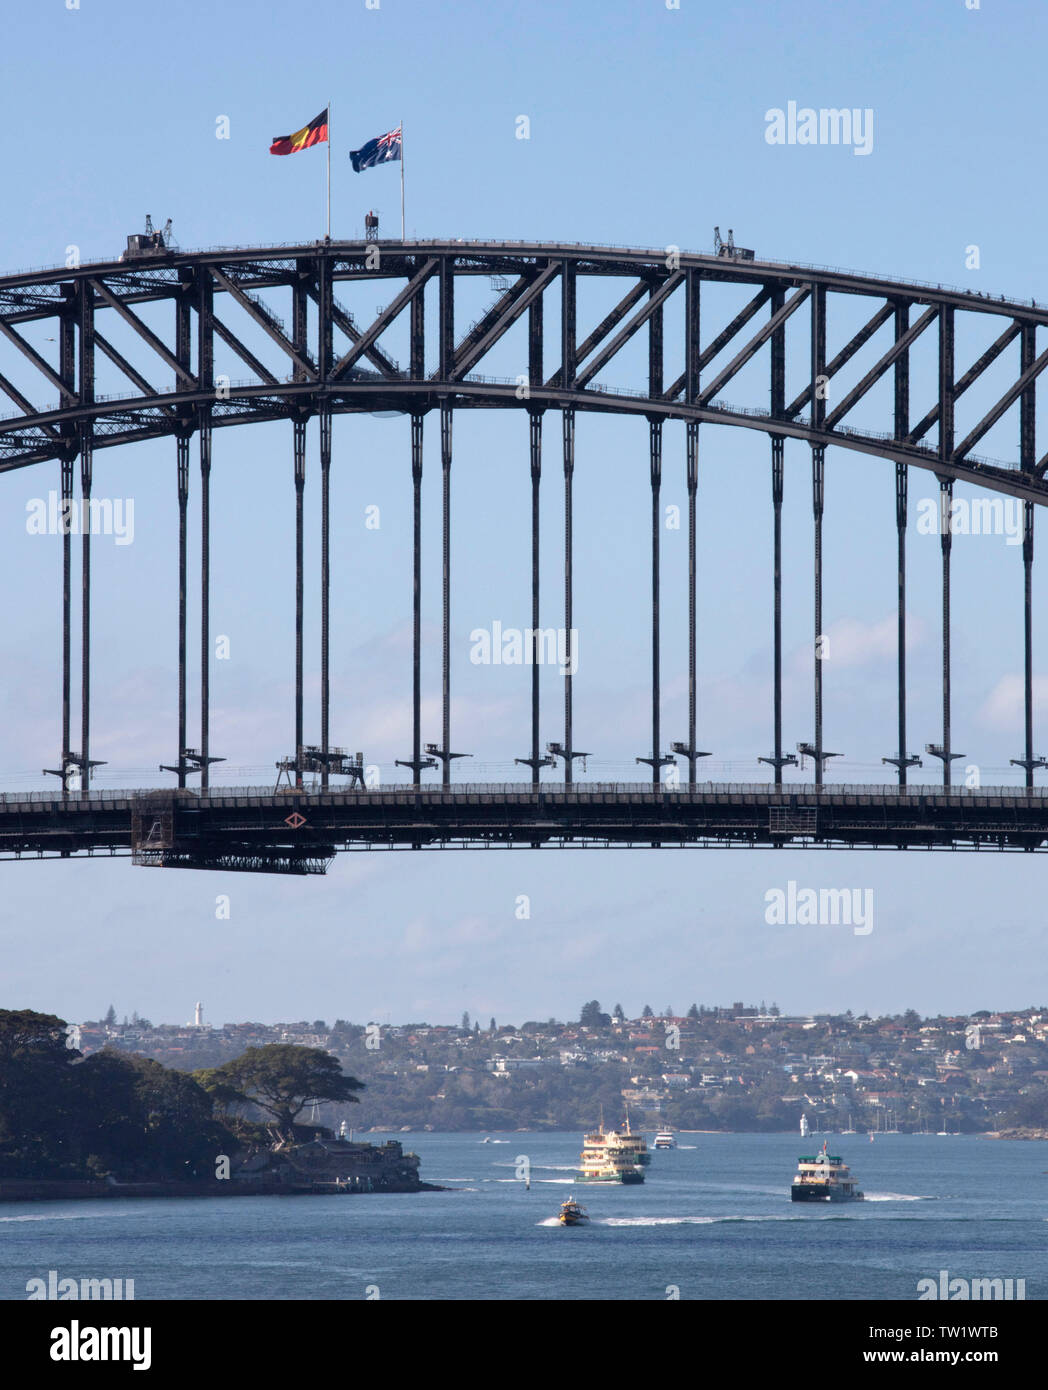 Detail of Sydney Harbor Bridge with national flag and aboriginal flag. Gardens of Admiralty house are situated at the bottom left. Boats are operating Stock Photo